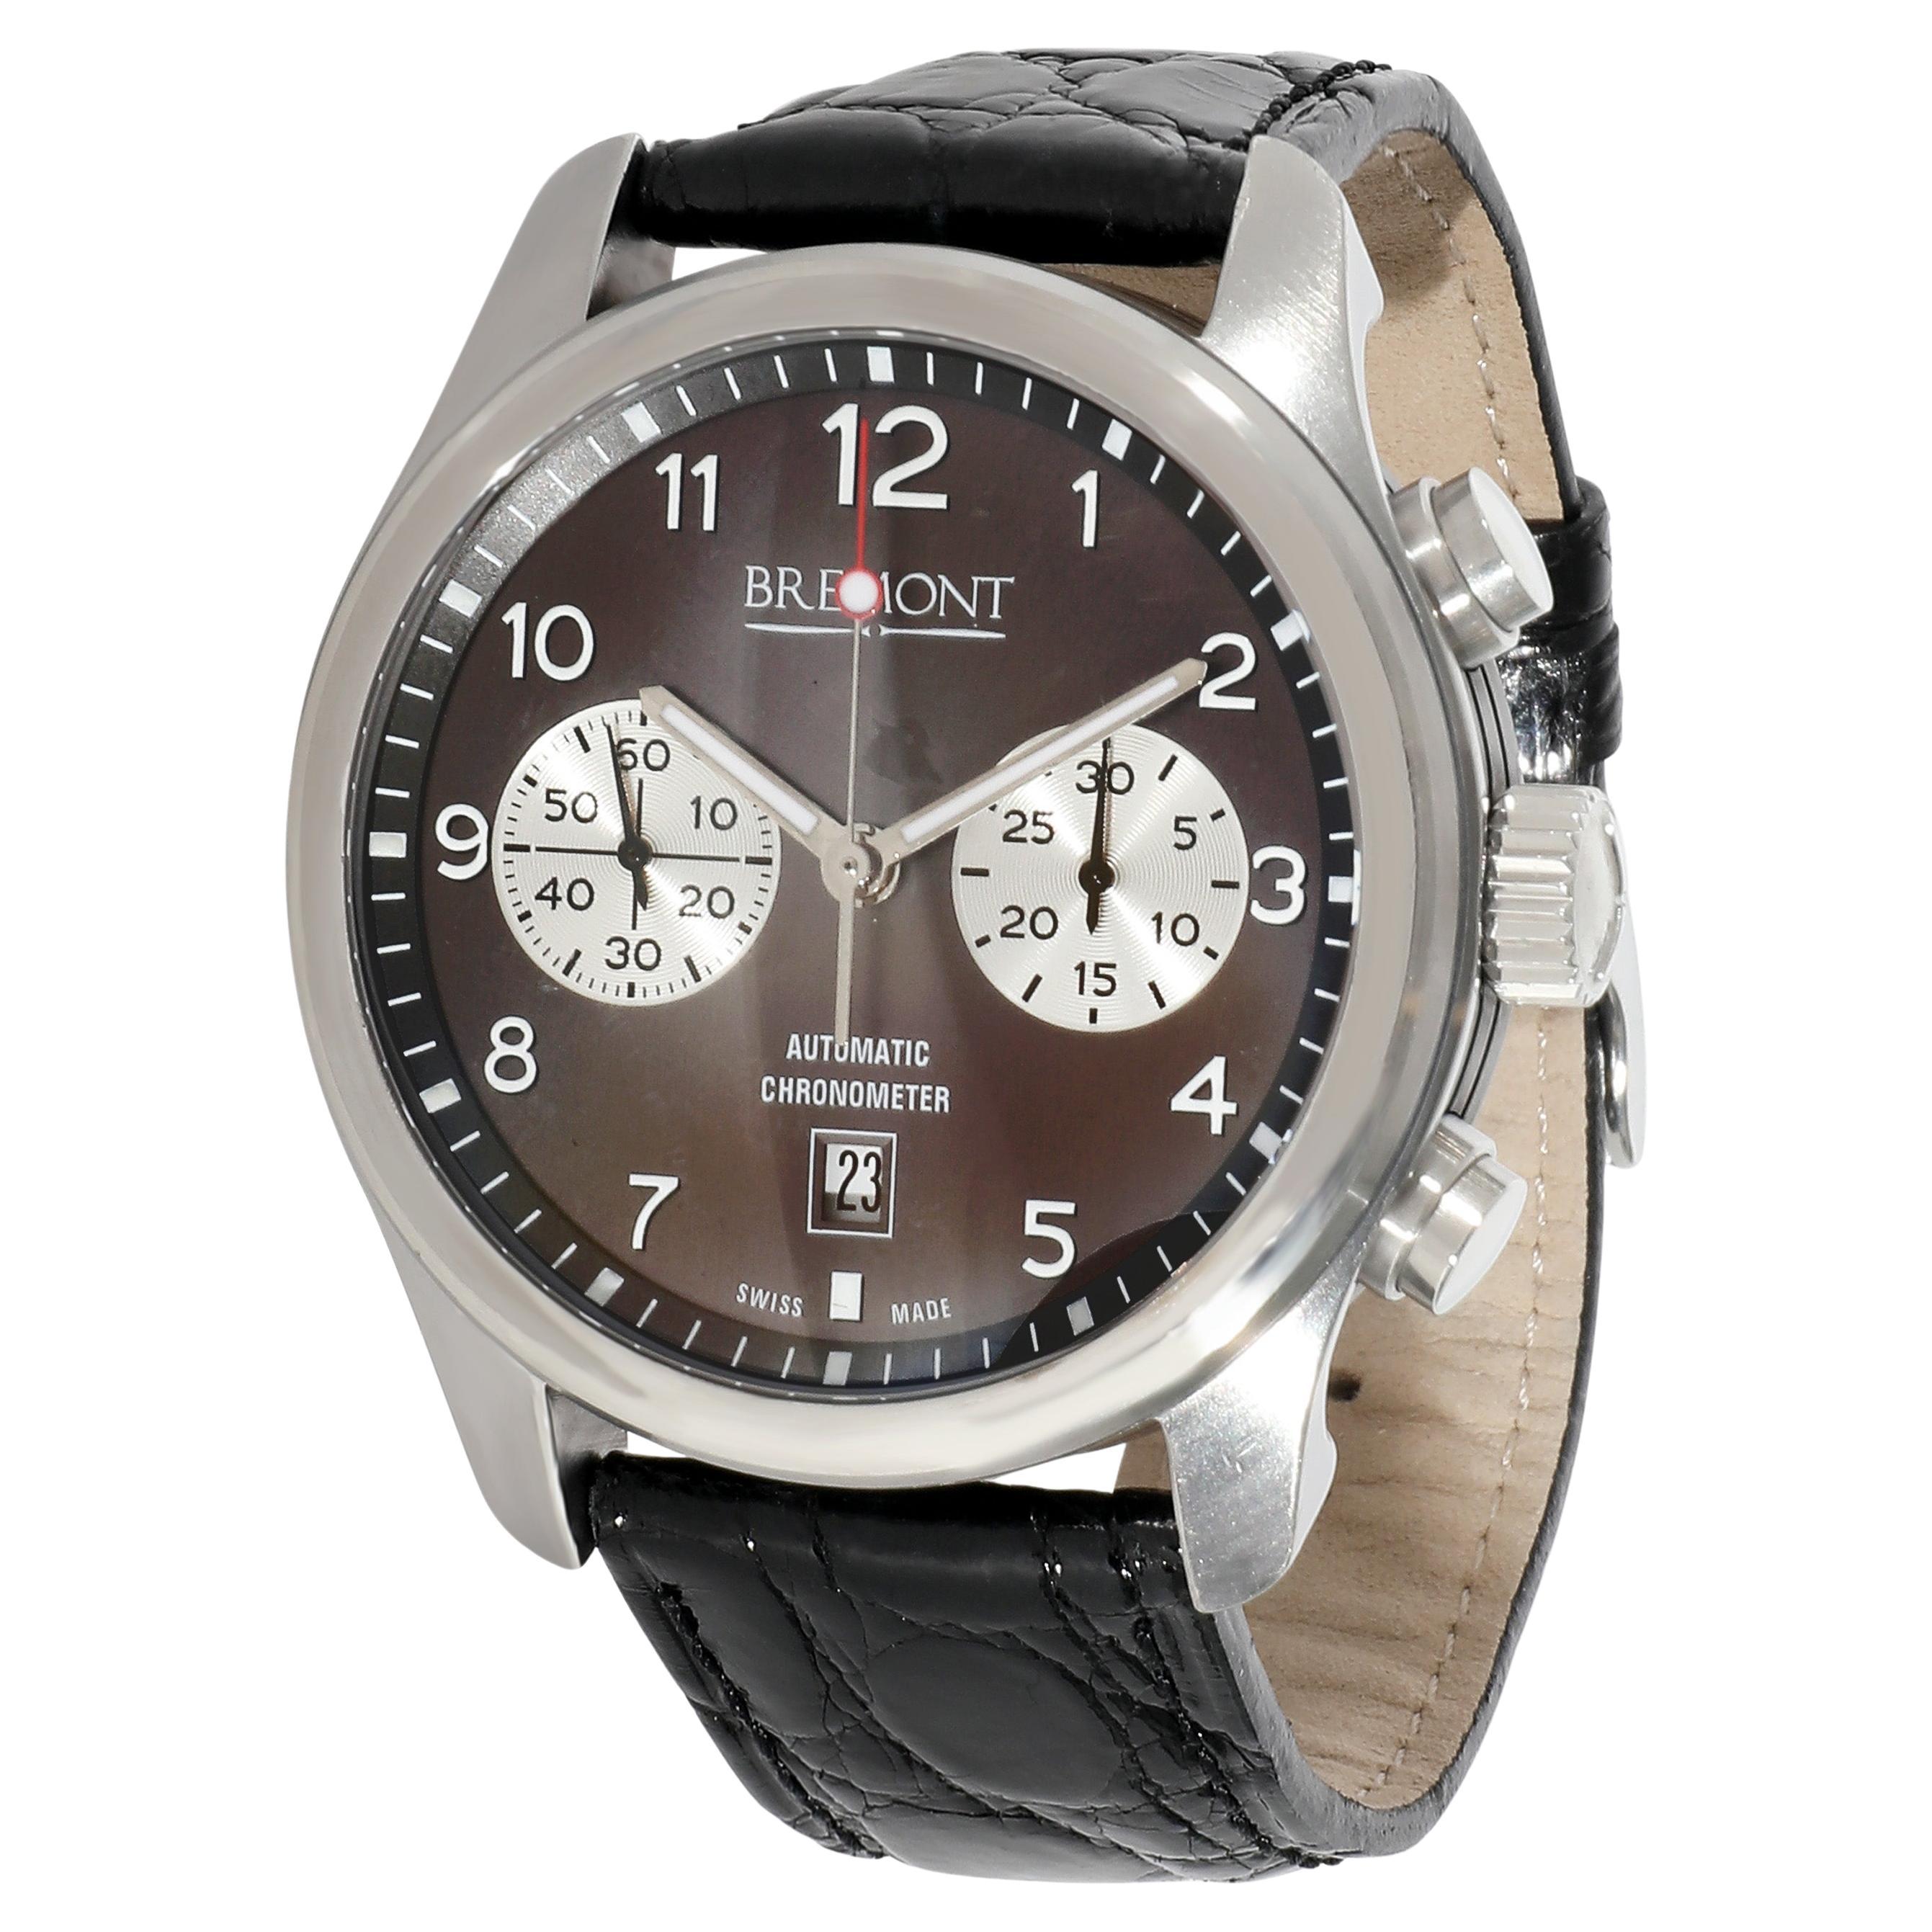 What movement do Bremont watches use?